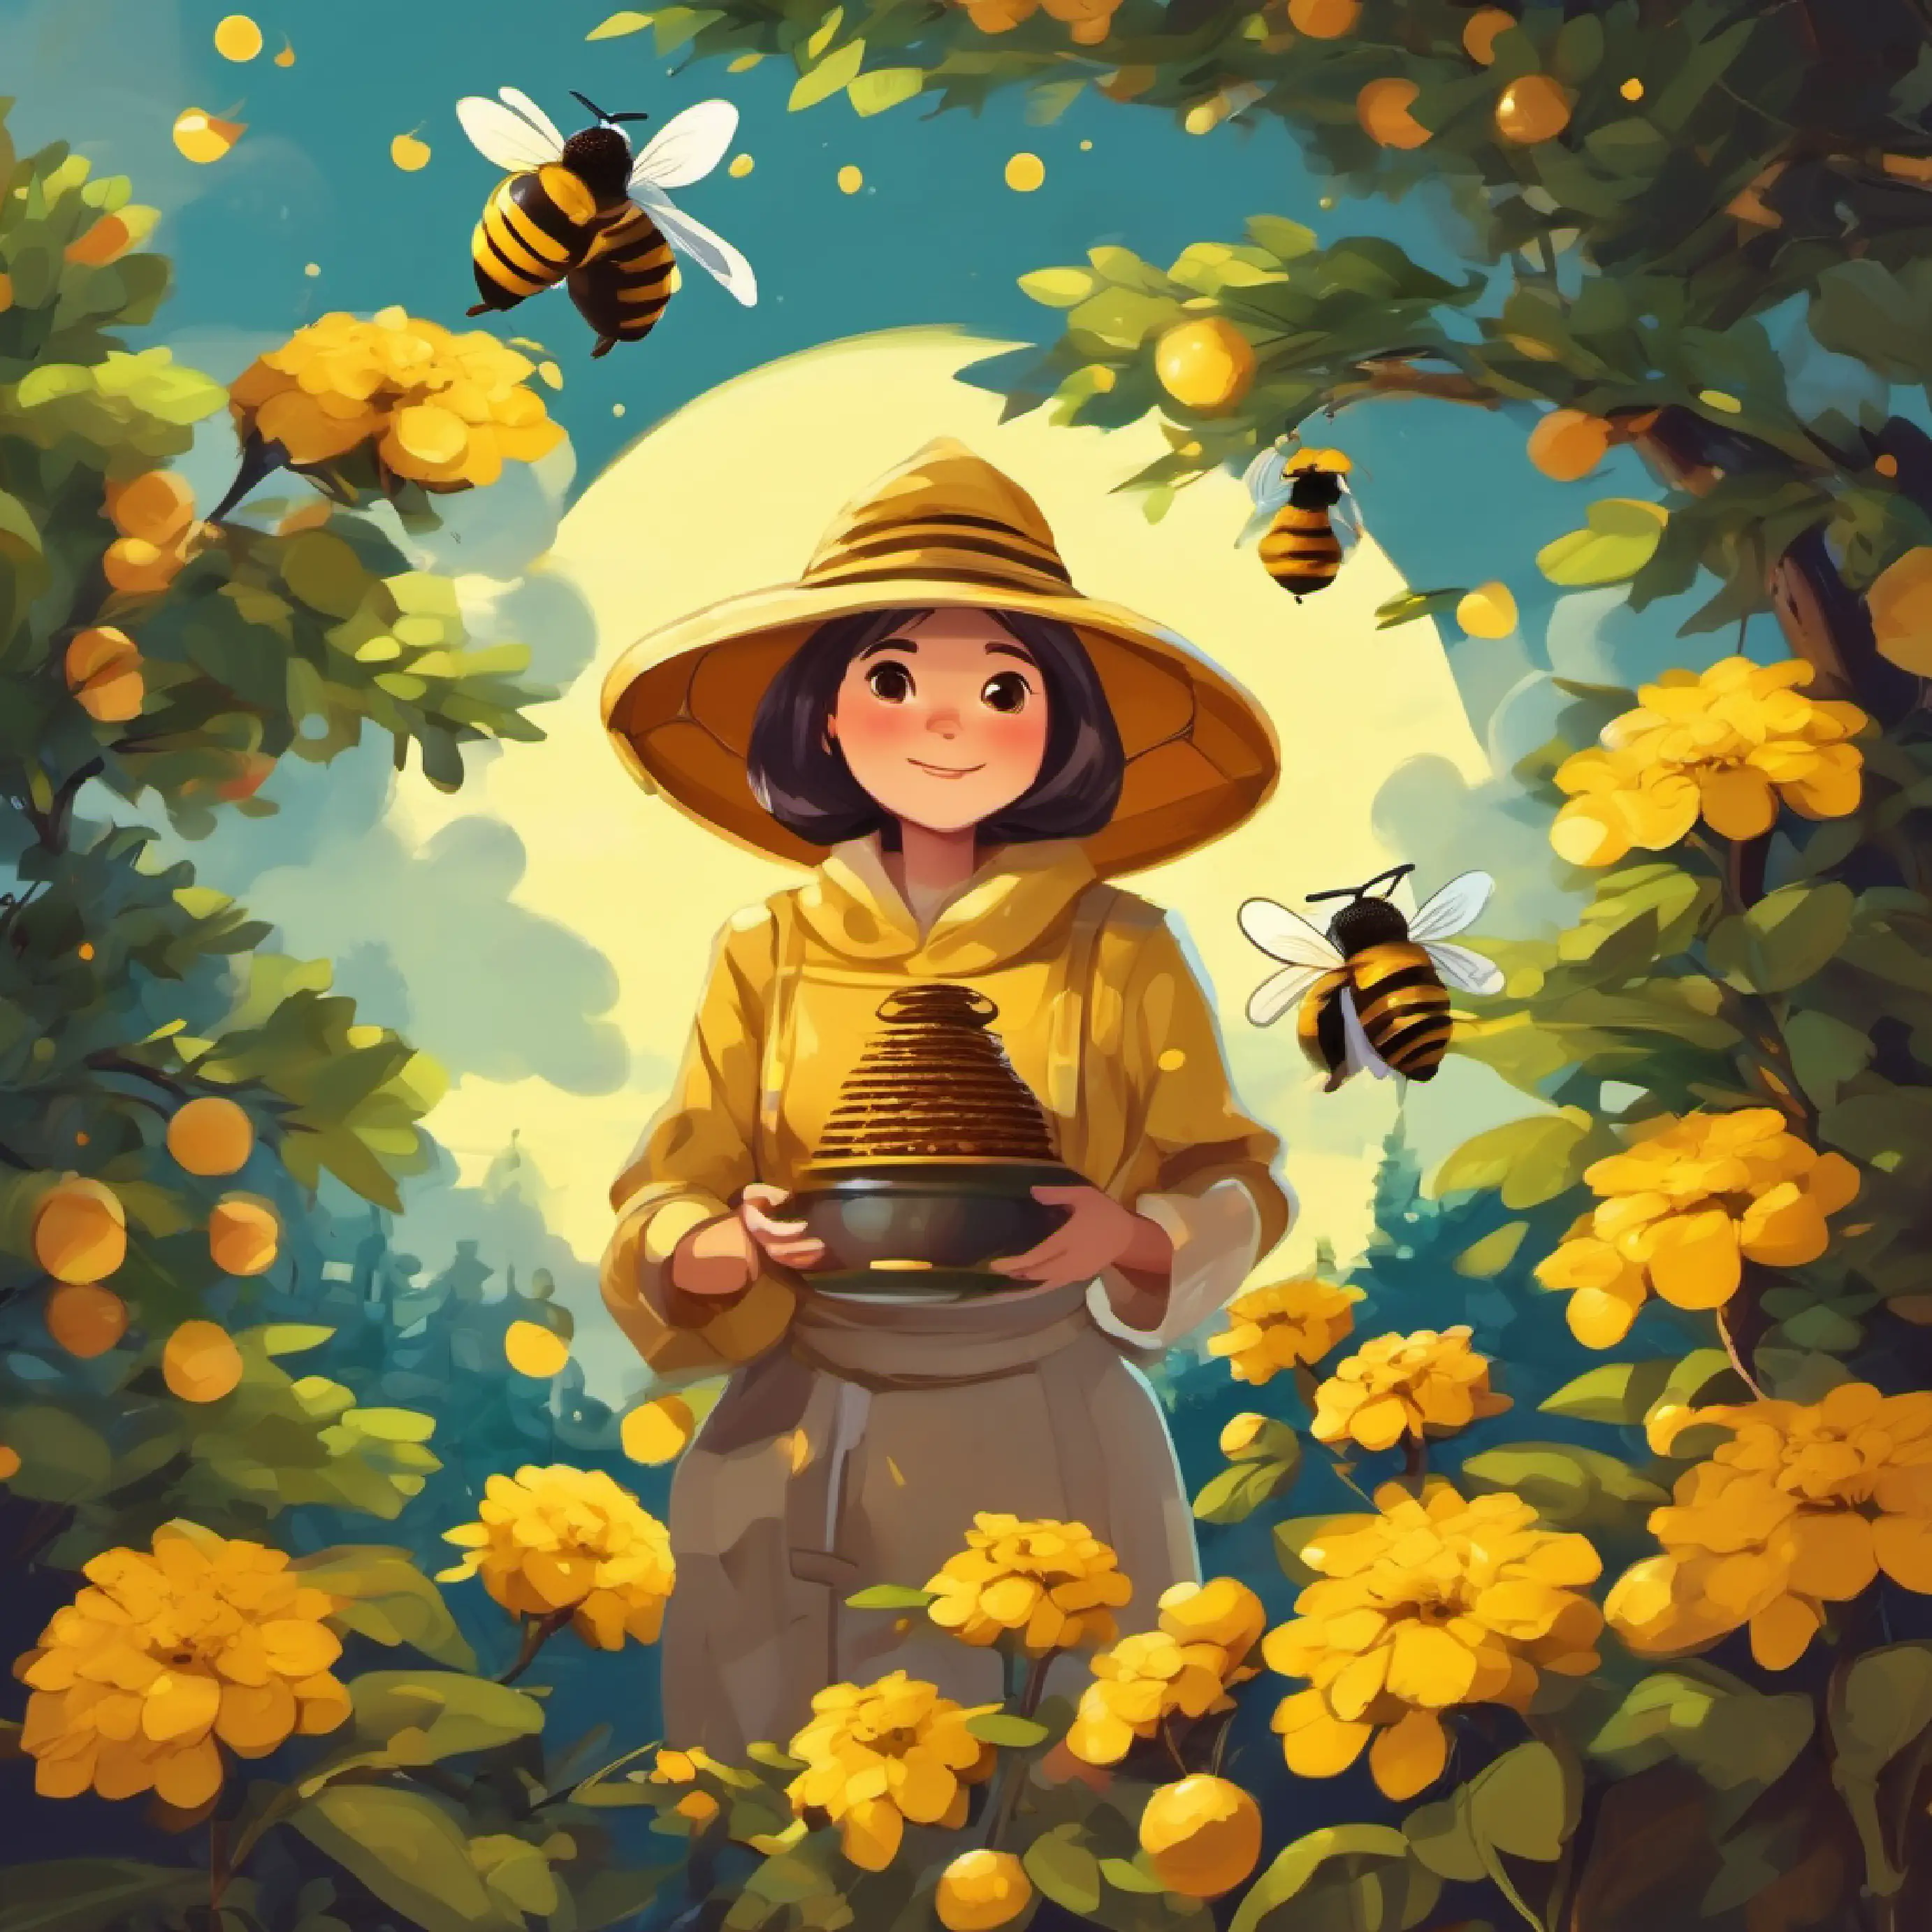 Six is a beekeeper with six bees.